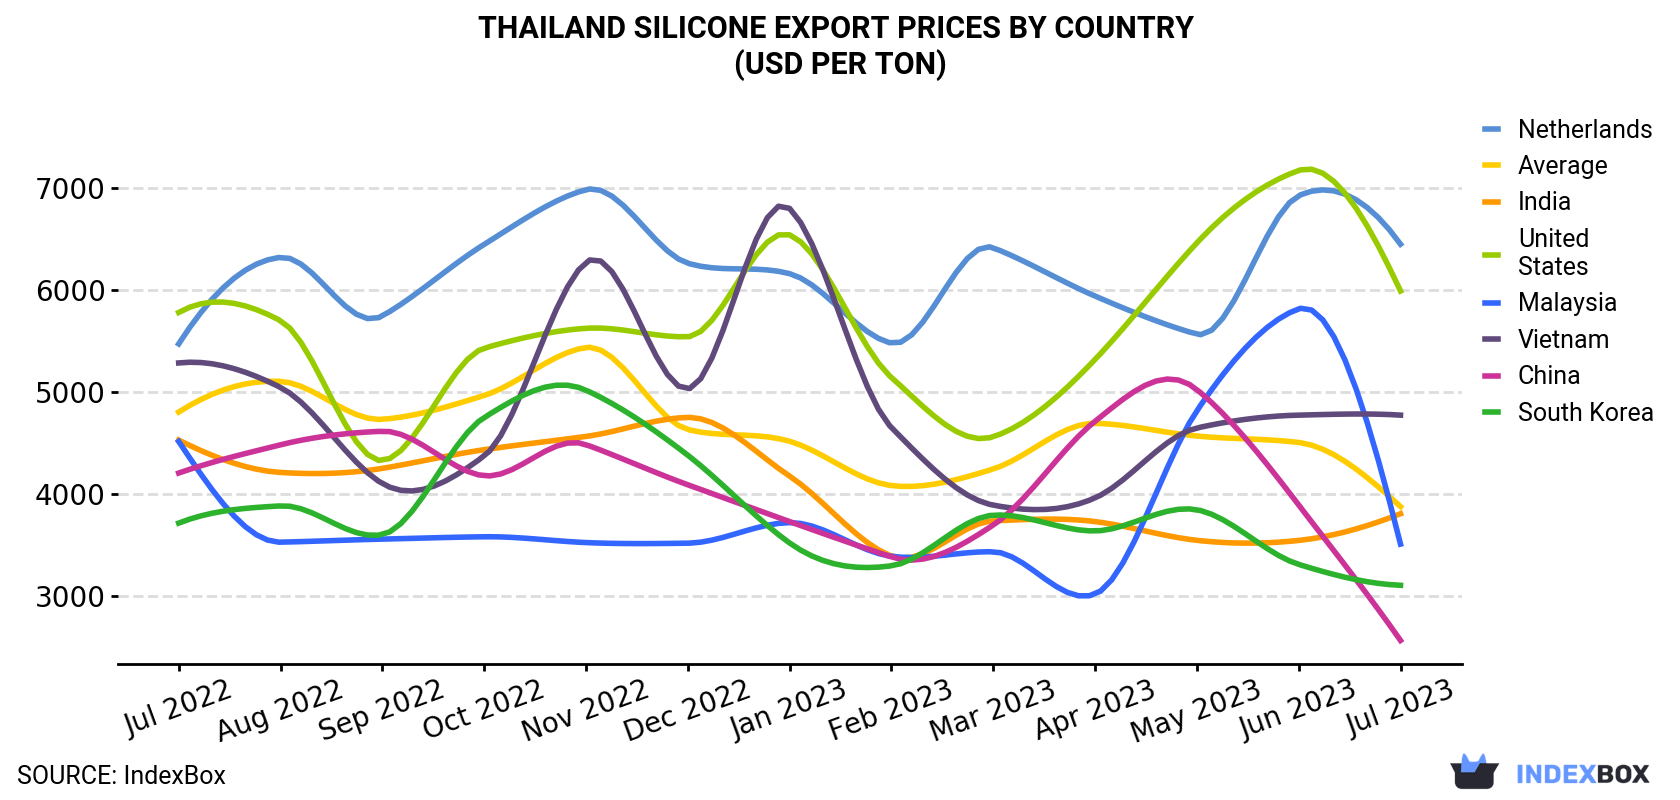 Thailand Silicone Export Prices By Country (USD Per Ton)